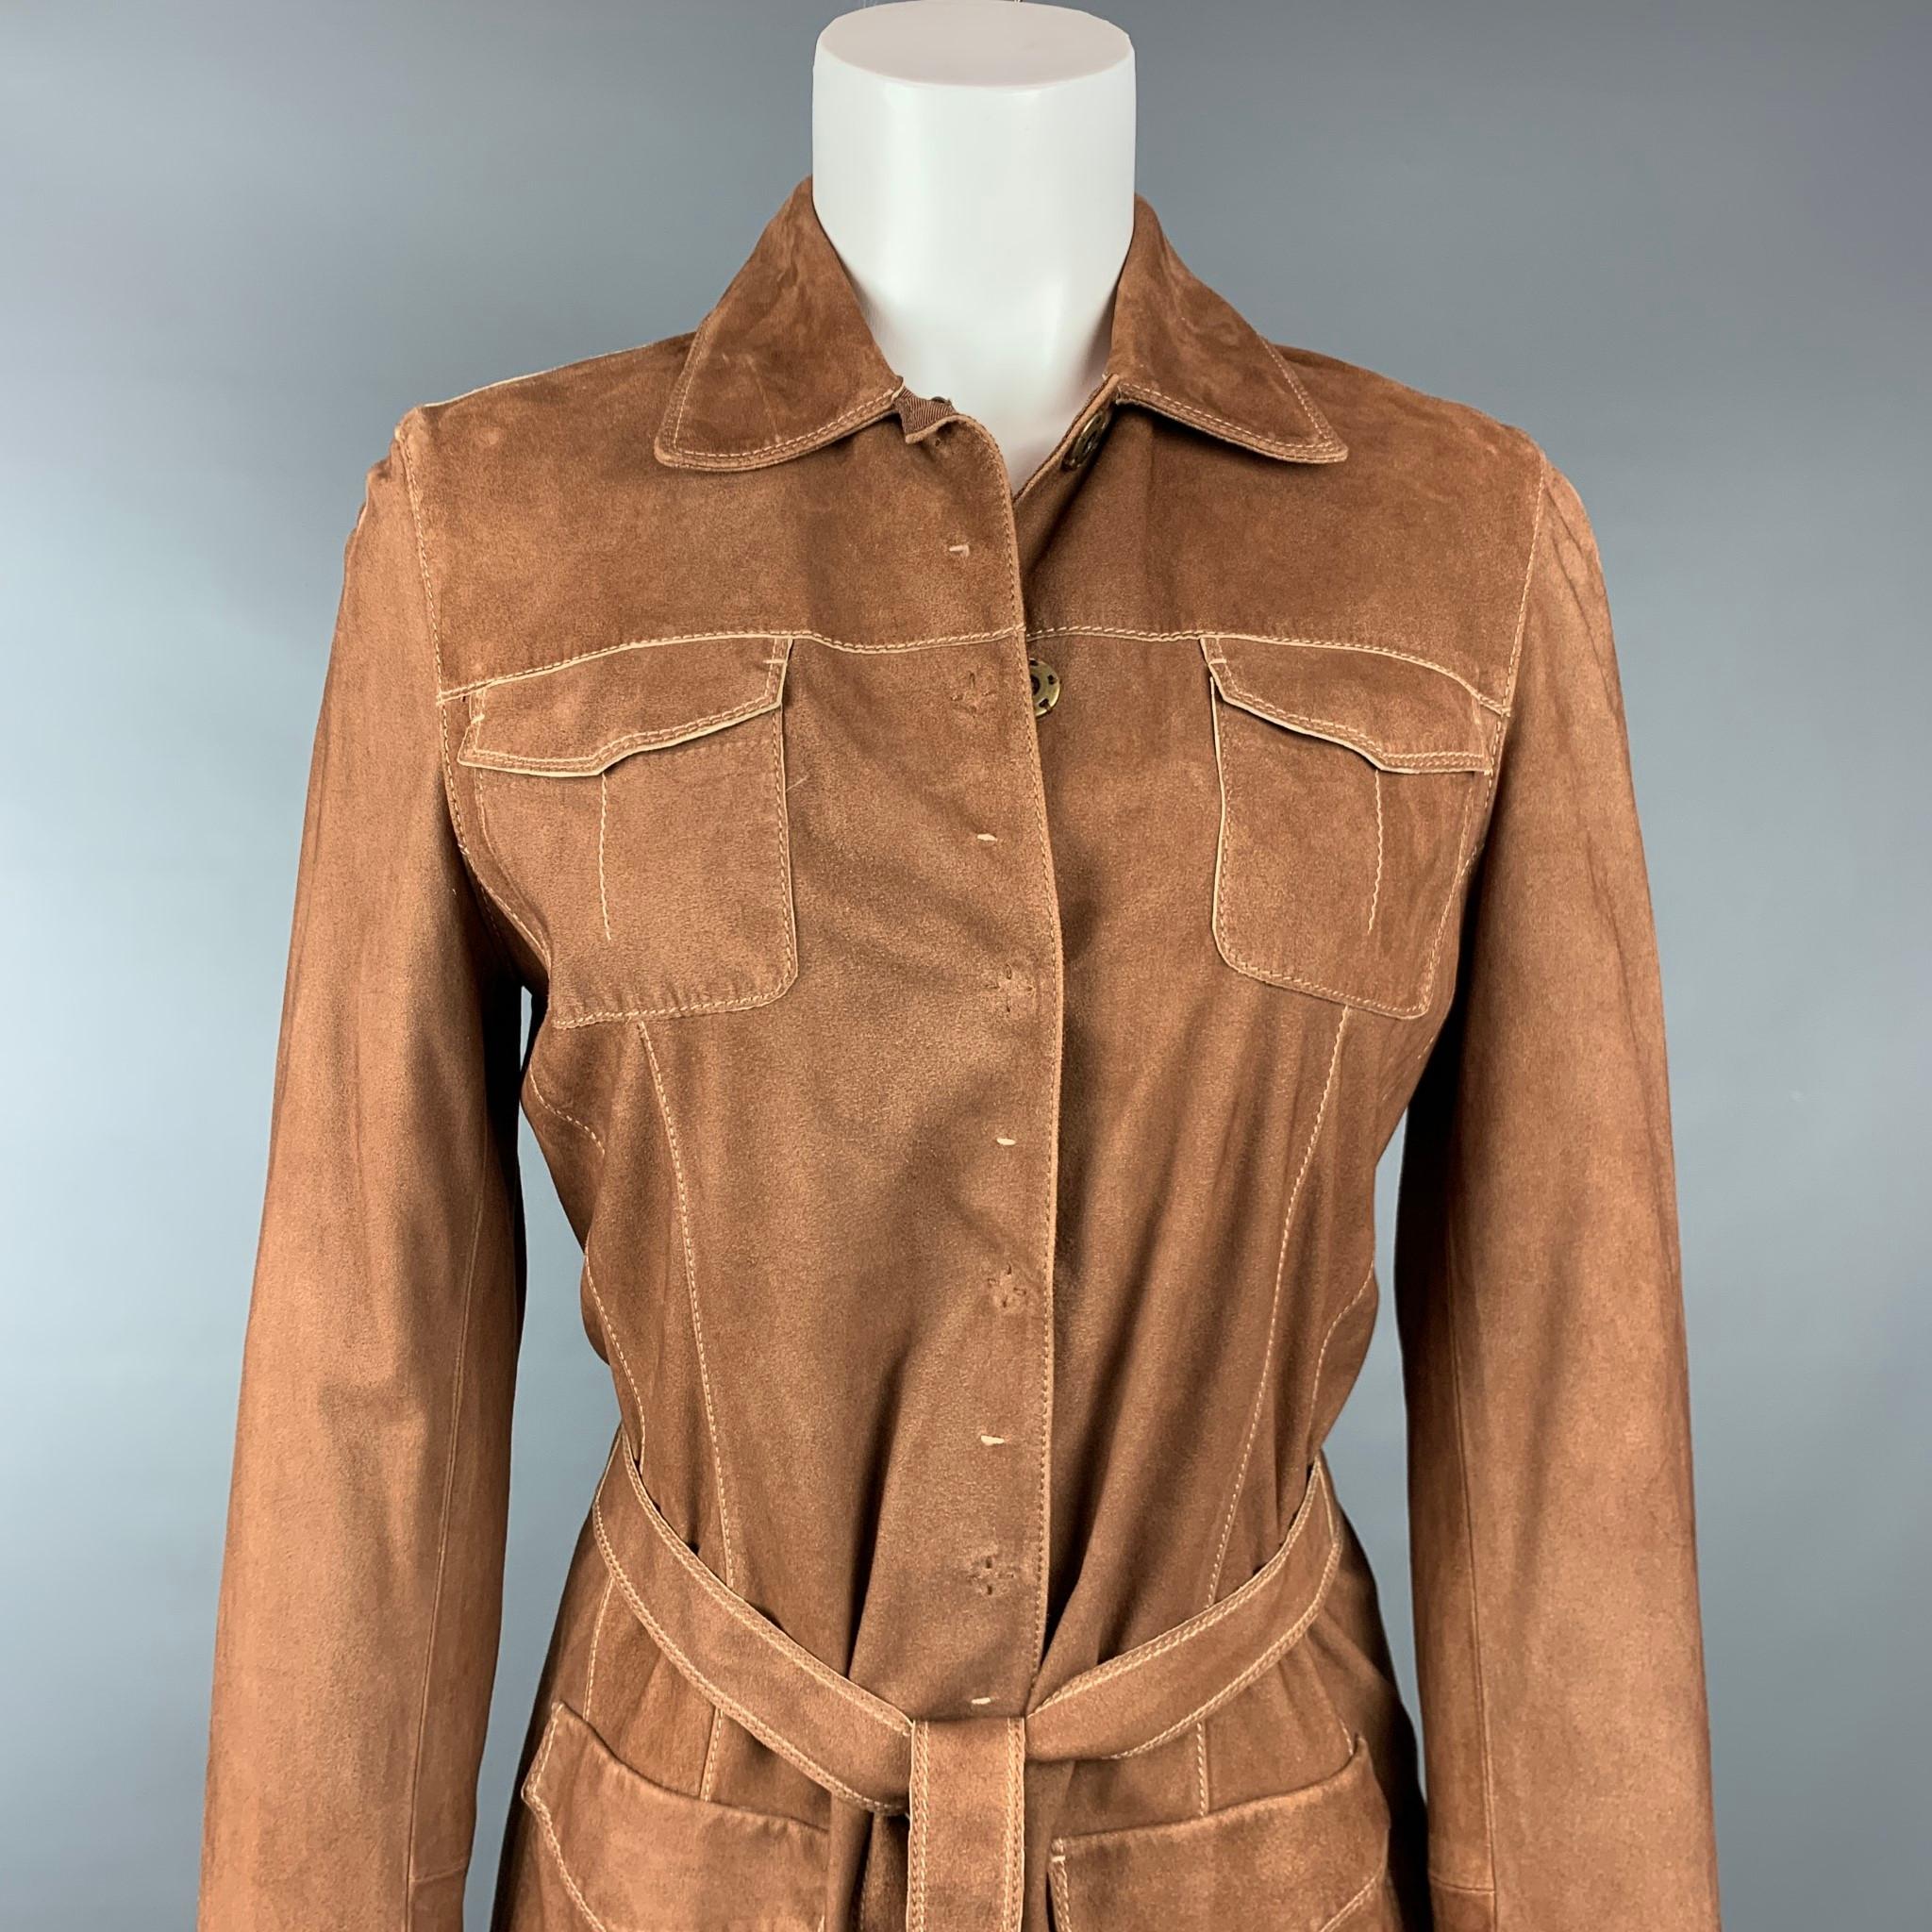 ELIE TAHARI jacket comes in a tan suede featuring a belted style, contrast stitching, front pockets, and a snap button closure. 

Very Good Pre-Owned Condition.
Marked: S

Measurements:

Shoulder: 16 in.
Bust: 36 in.
Sleeve: 25 in.
Length: 25 in. 